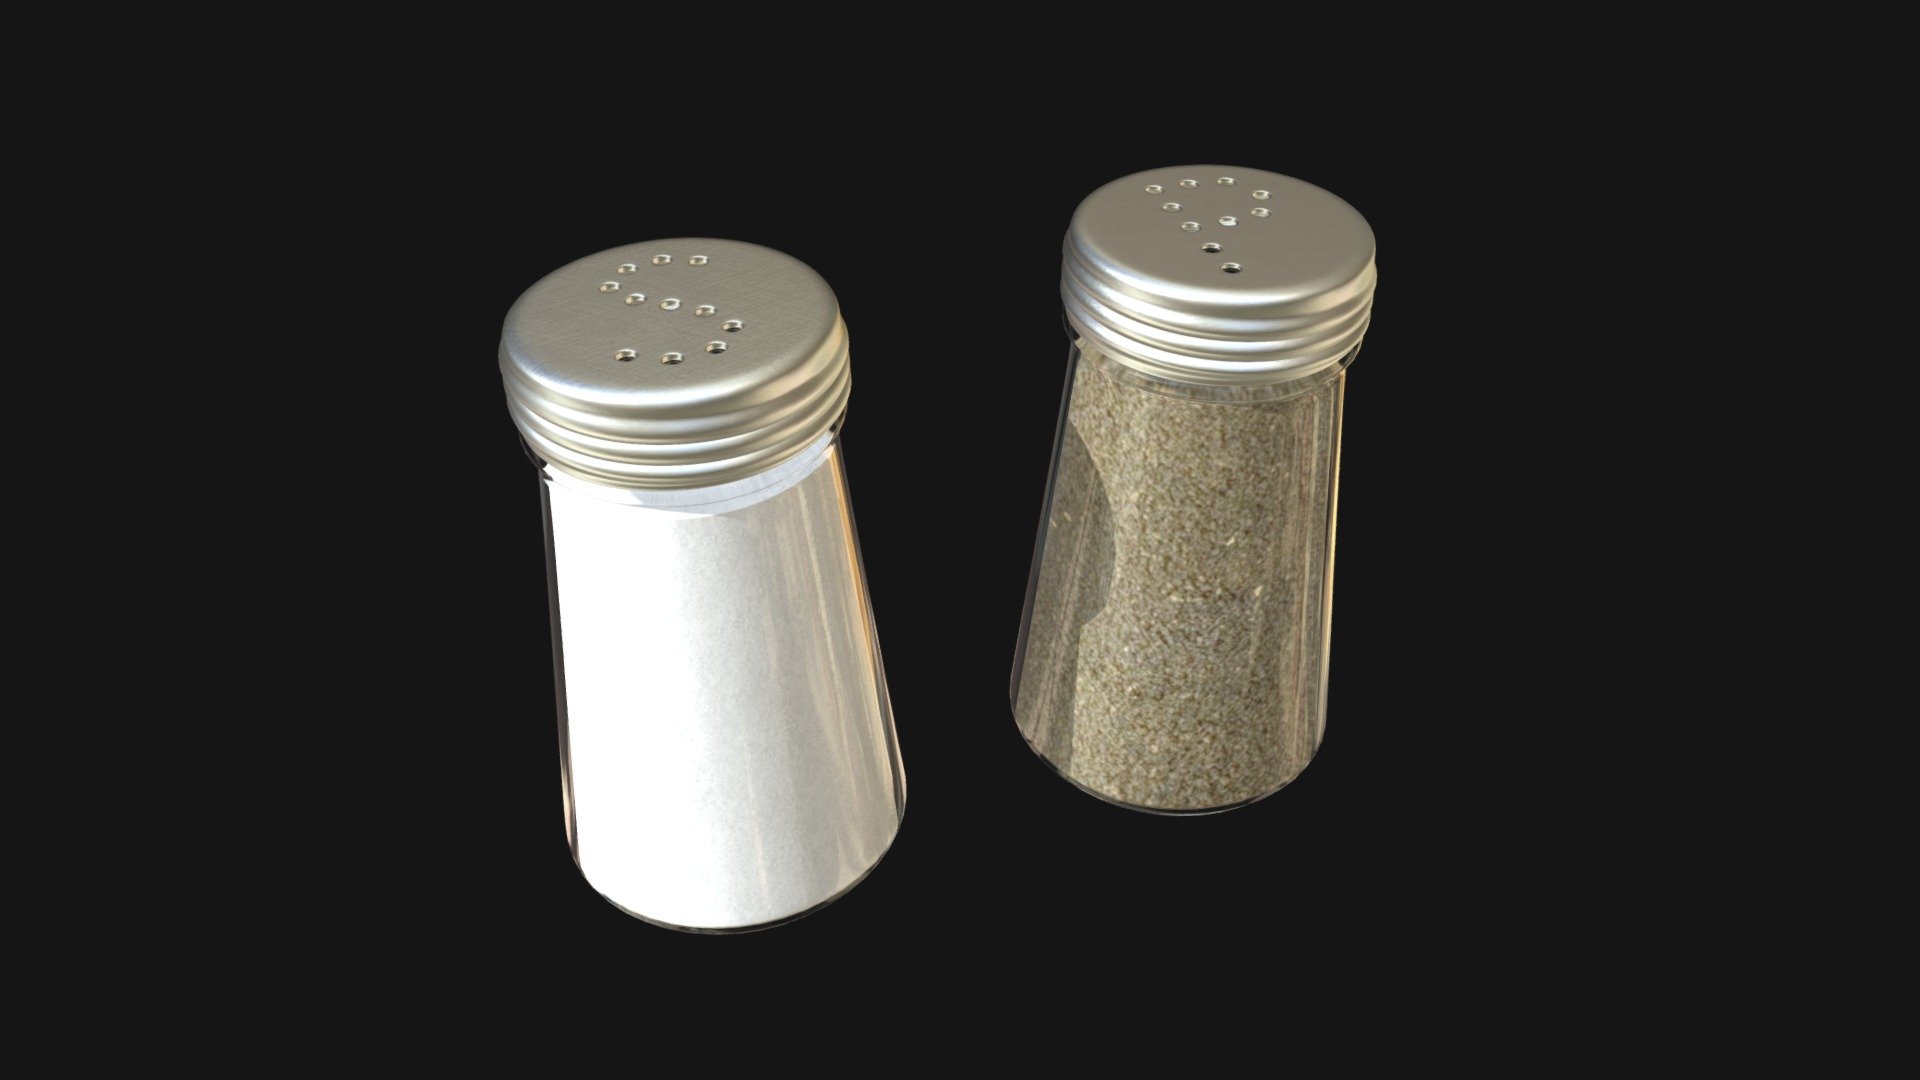 === The following description refers to the additional ZIP package provided with this model ===
Salt and pepper 3D Model, nr. 3 in my collection. 6 individual objects (2 containers, 2 covers, salt, pepper), sharing 2 non overlapping UV Layout maps, Materials (glass, other) and PBR Textures sets. Production-ready 3D Model, with PBR materials, textures, non overlapping UV Layout map provided in the package.
Quads only geometries (no tris/ngons).
Formats included: FBX, OBJ; scenes: BLEND (with Cycles / Eevee PBR Materials and Textures); other: png with Alpha.
6 Objects (meshes), 2 PBR Materials, UV unwrapped (non overlapping UV Layout map provided in the package); UV-mapped Textures.
UV Layout maps and Image Textures resolutions: 2048x2048; PBR Textures made with Substance Painter.
Polygonal, QUADS ONLY (no tris/ngons); 52514 vertices, 52544 quad faces (105088 tris).
Real world dimensions; scene scale units: cm in Blender 3.2 (that is: Metric with 0.01 scale).
Uniform scale object (scale applied in Blender 3.2) 3d model